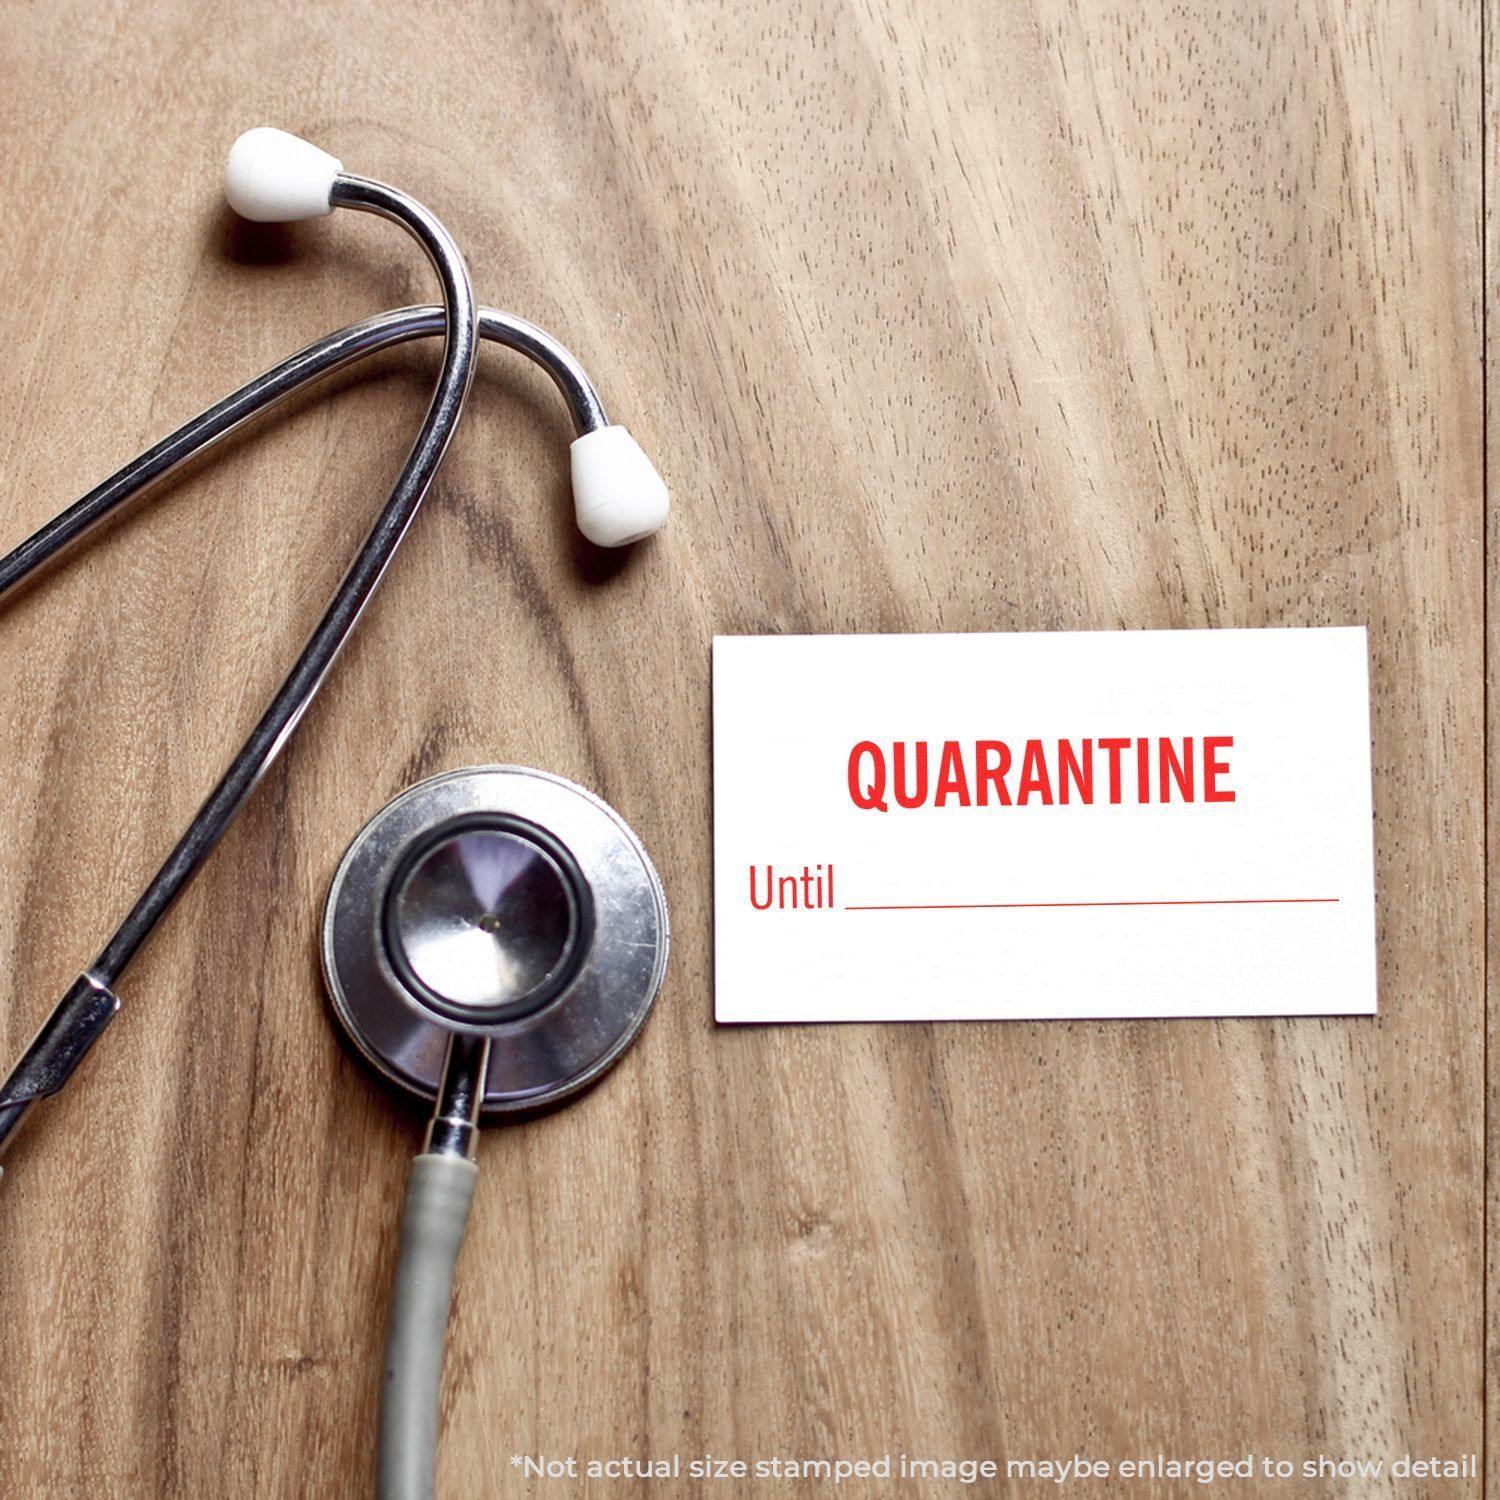 A stock office rubber stamp with a stamped image showing how the text "QUARANTINE Until" with a line is displayed after stamping.